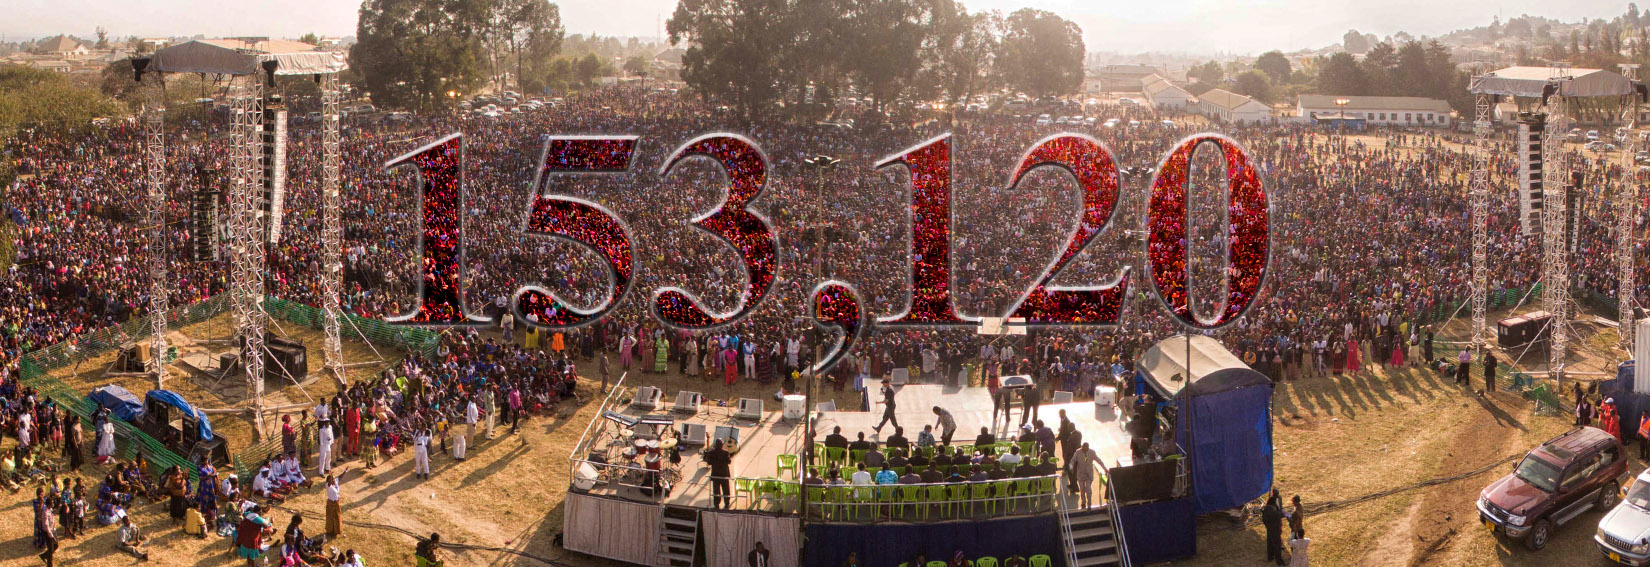 Mbeya2-Blog-Numbers-FRONT